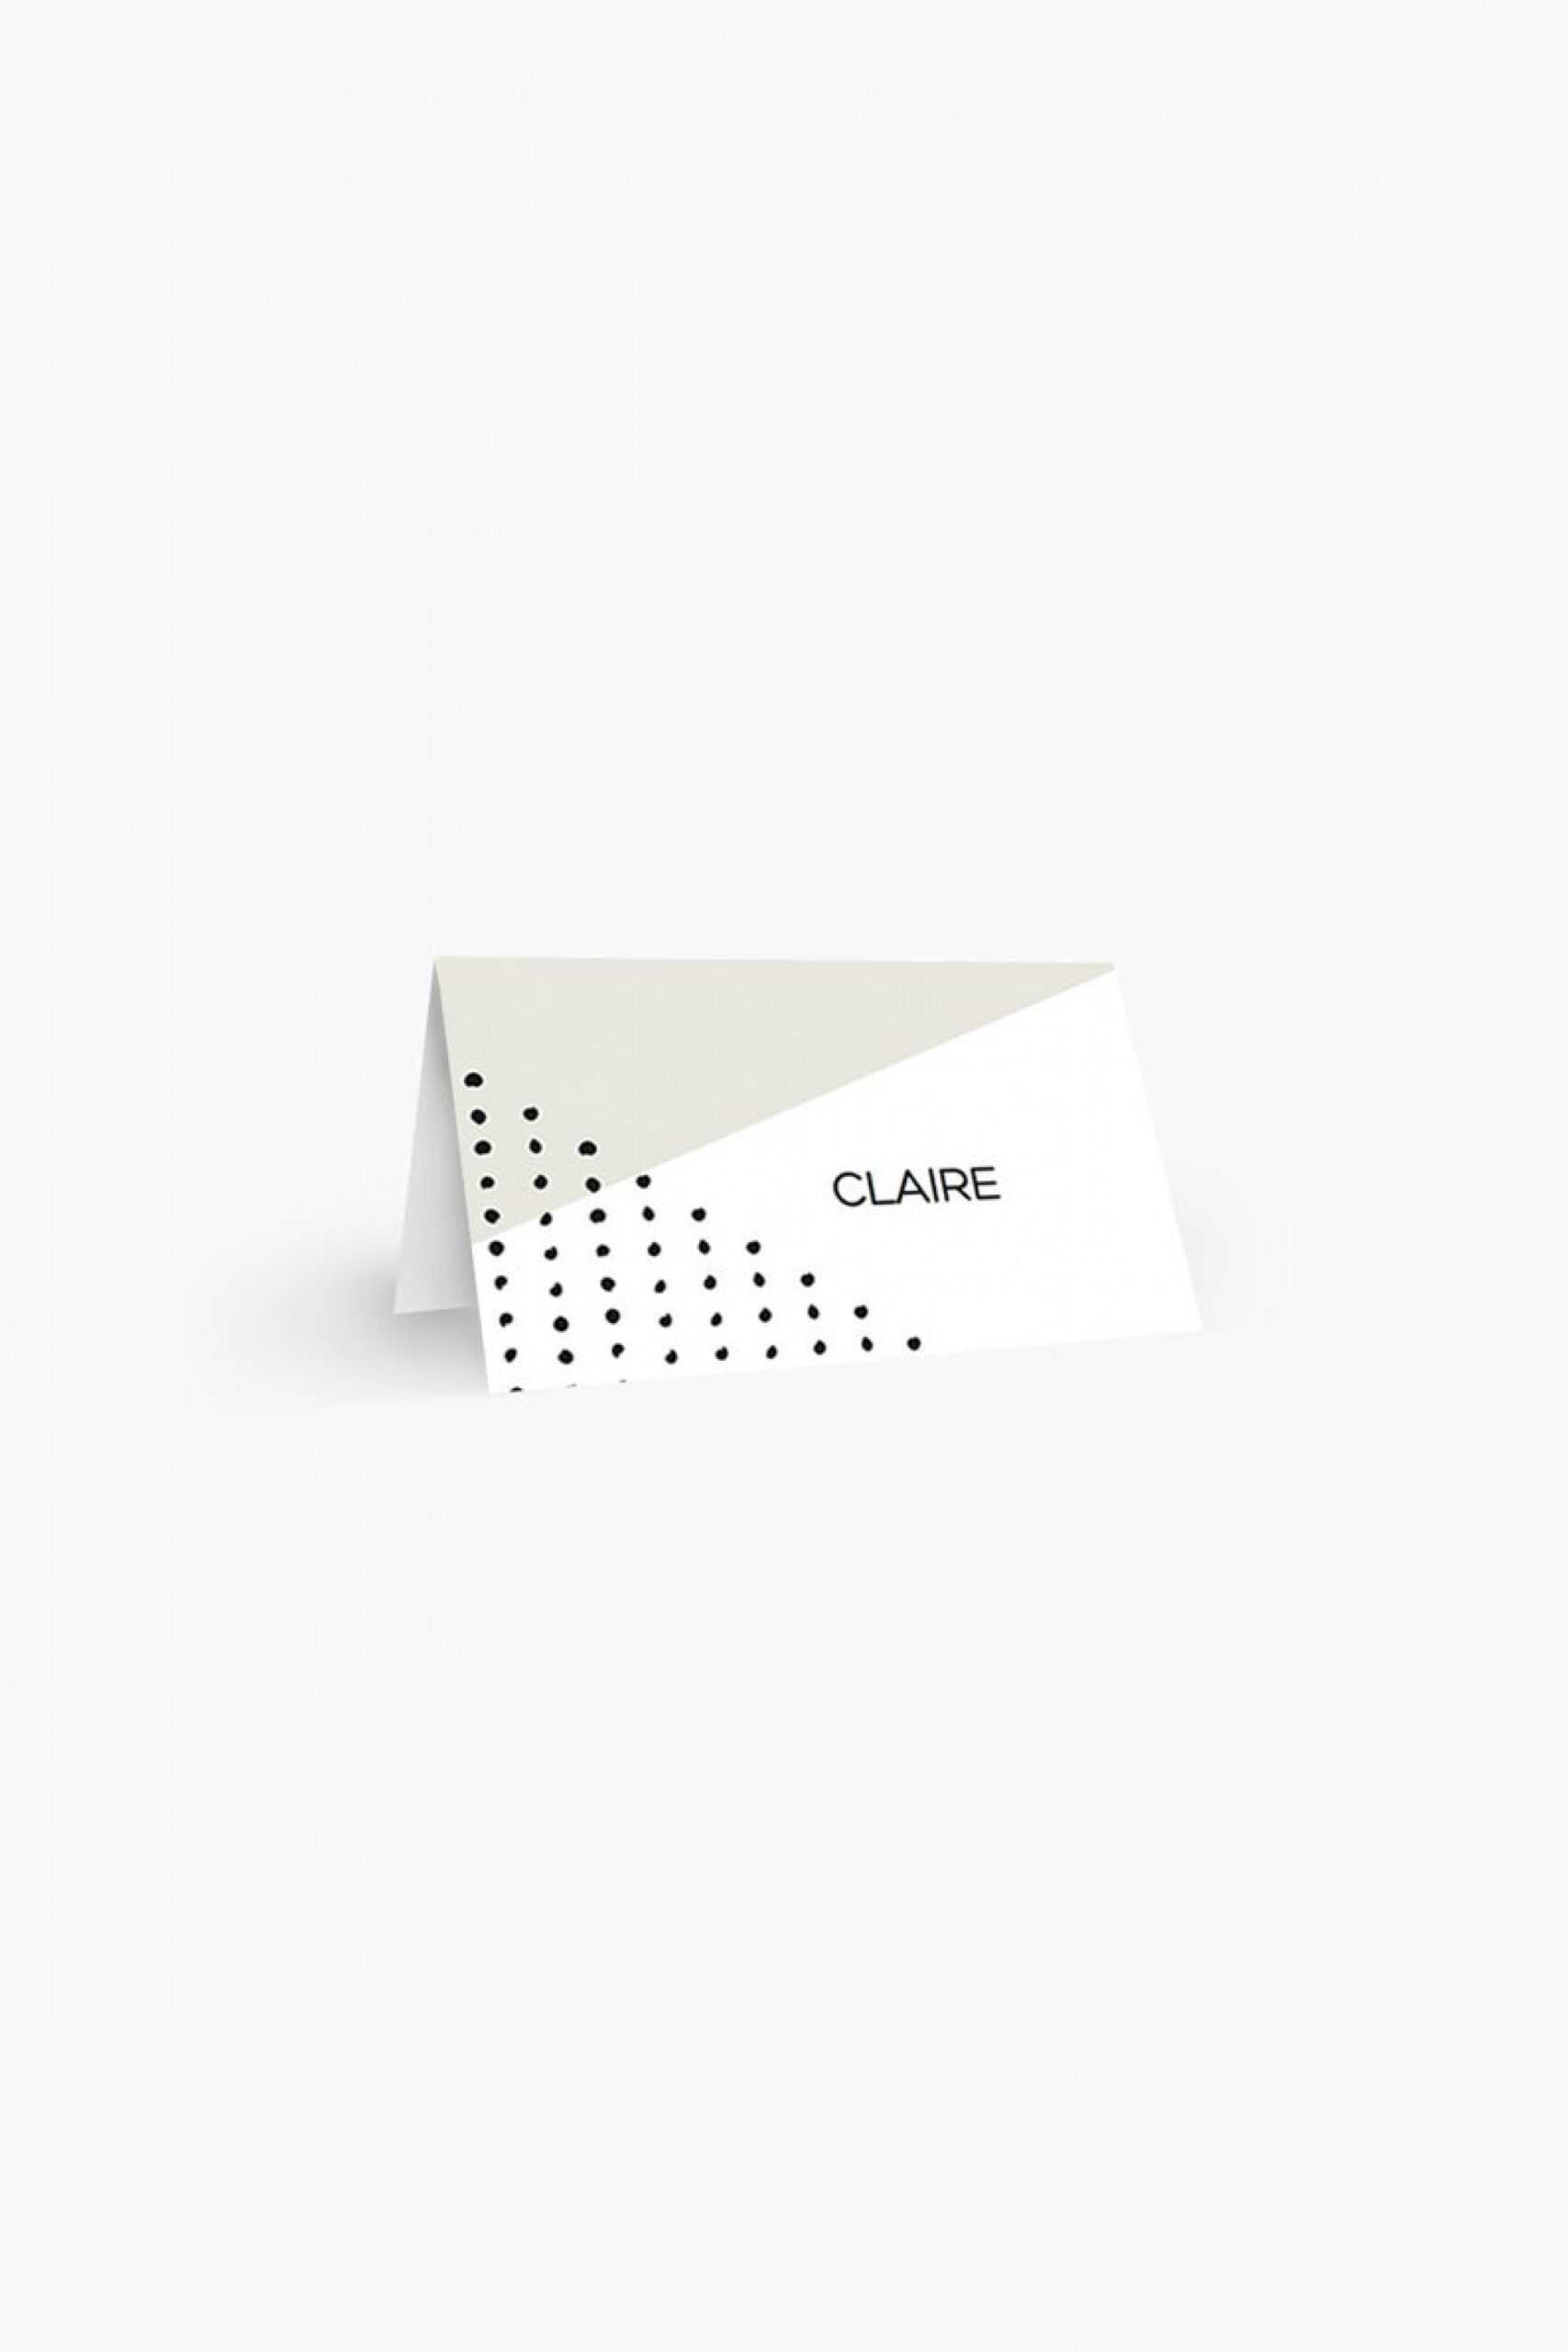 012 Printable Place Cards Template Ideas Card Instant Regarding Paper Source Templates Place Cards